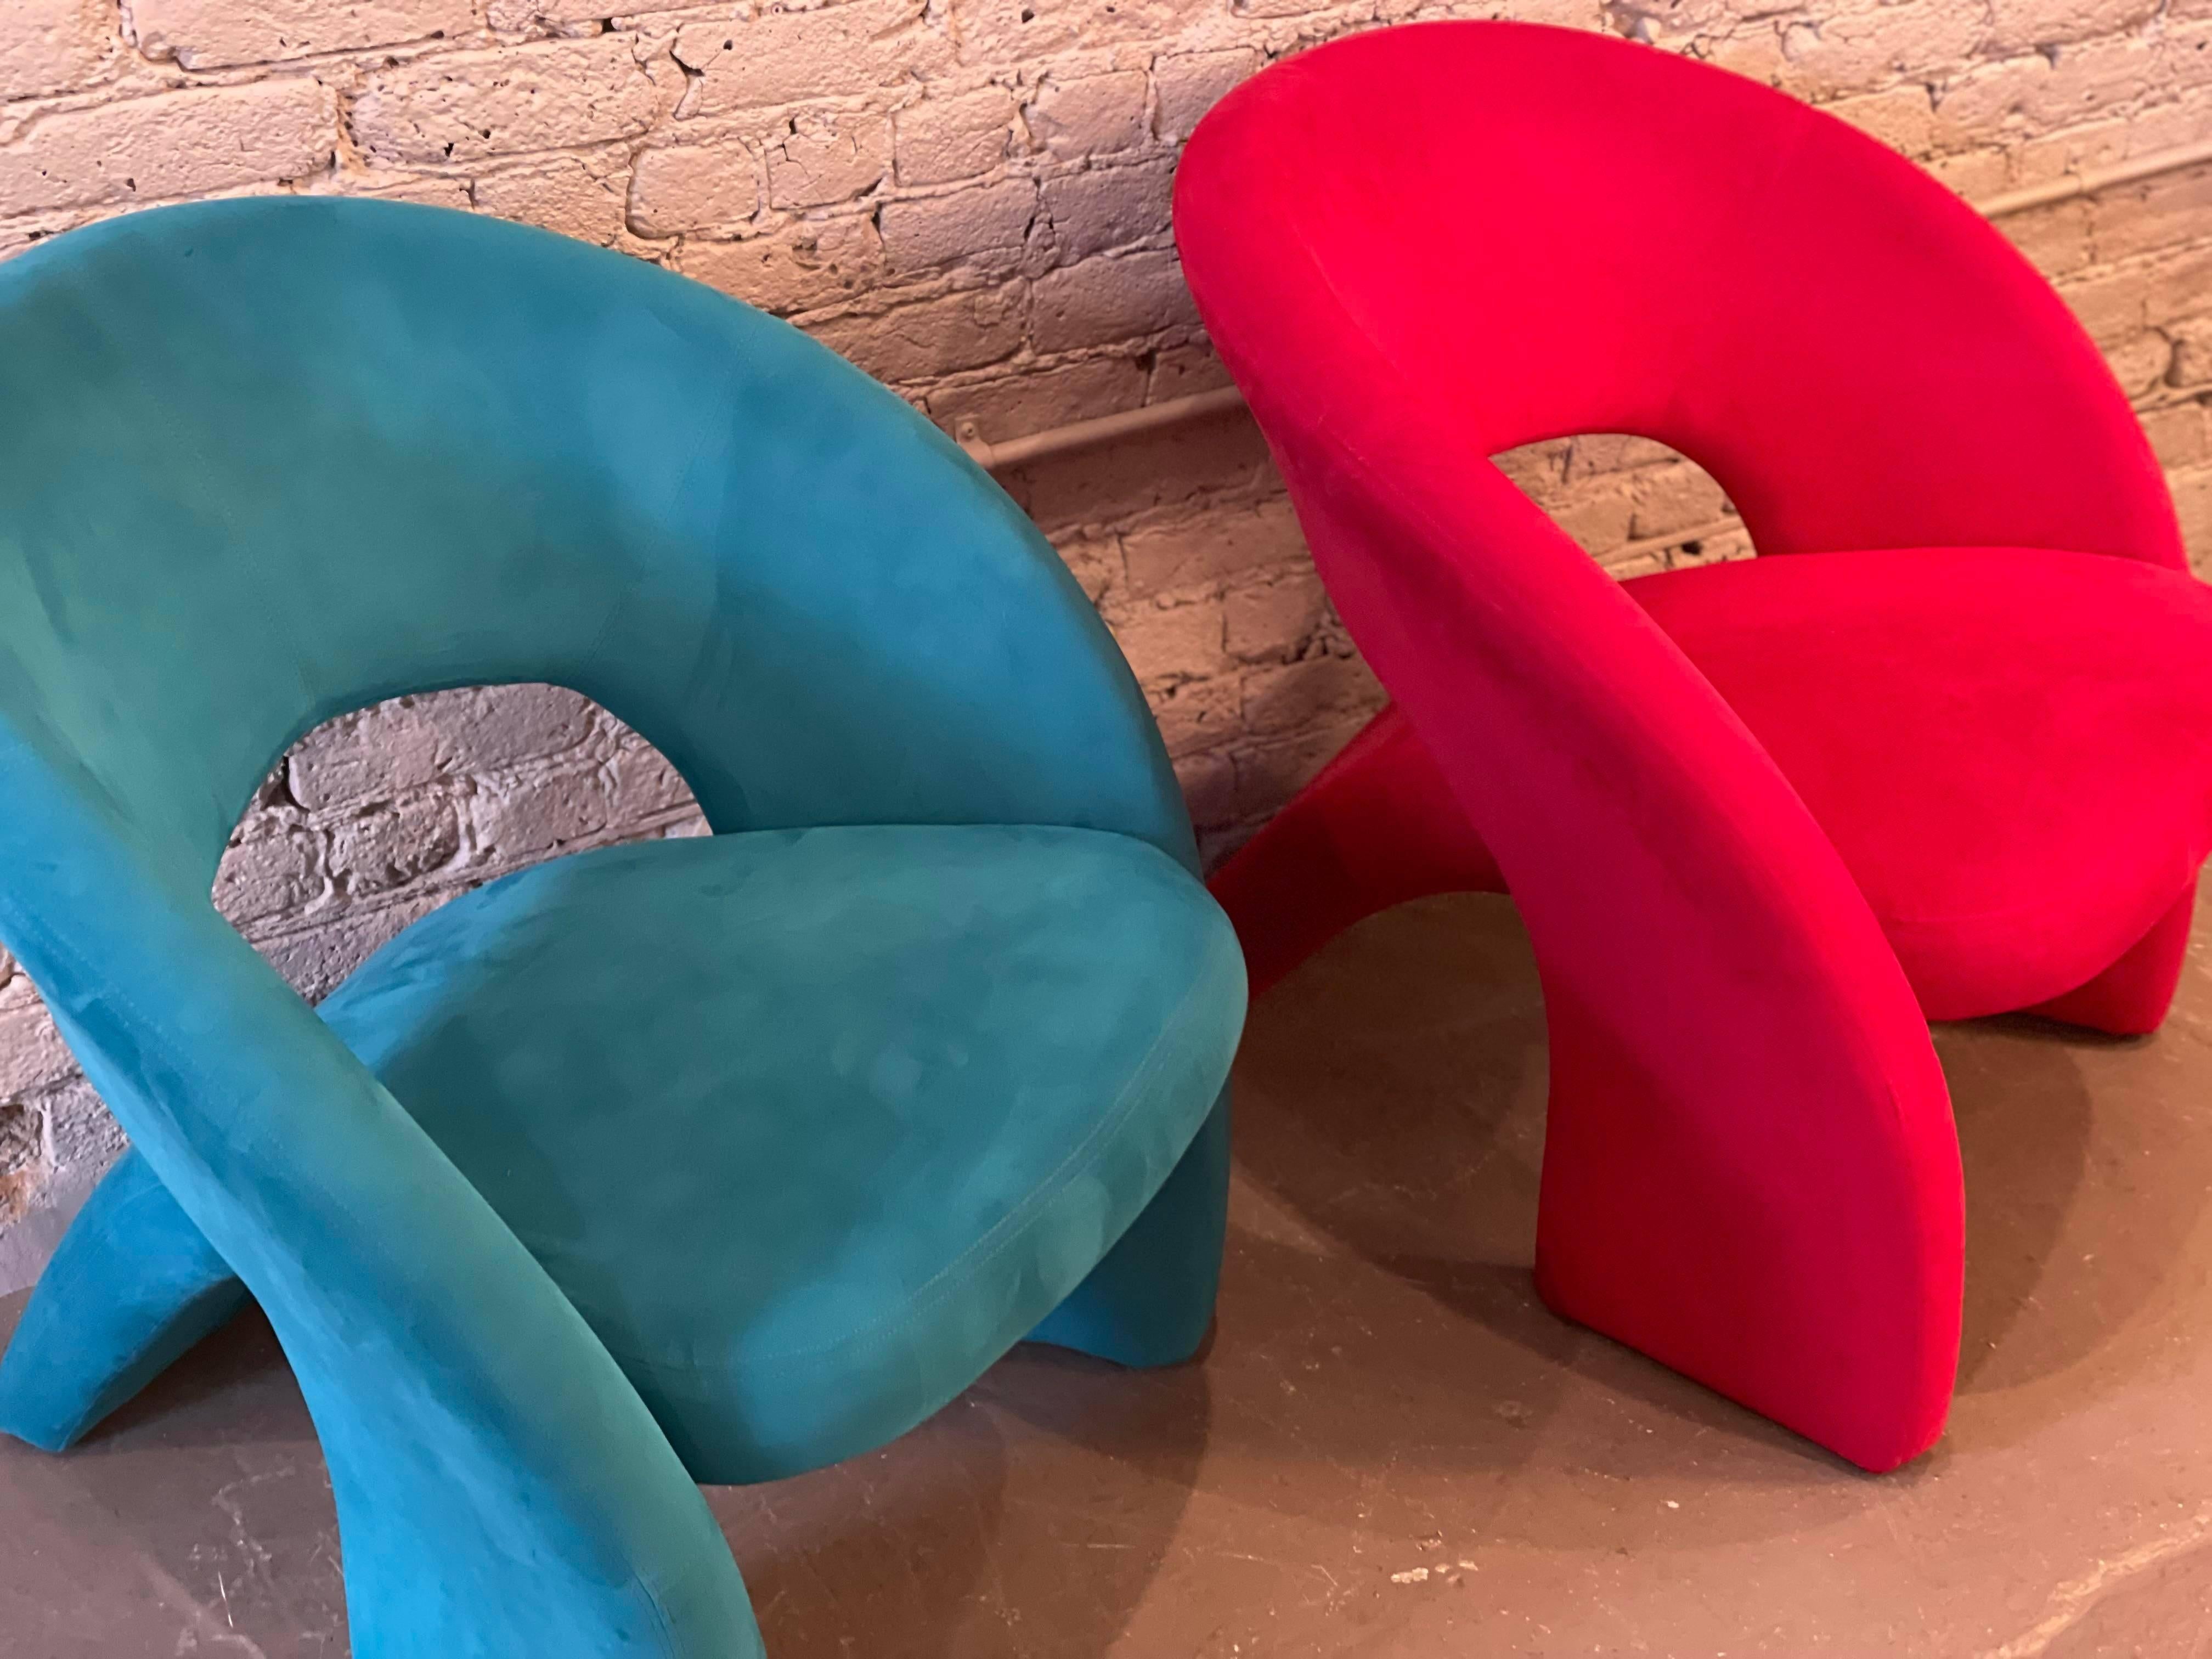 Very fun and comfortable chairs. Not sure who made them but love love the shape and the comfort!

Dimensions: 30